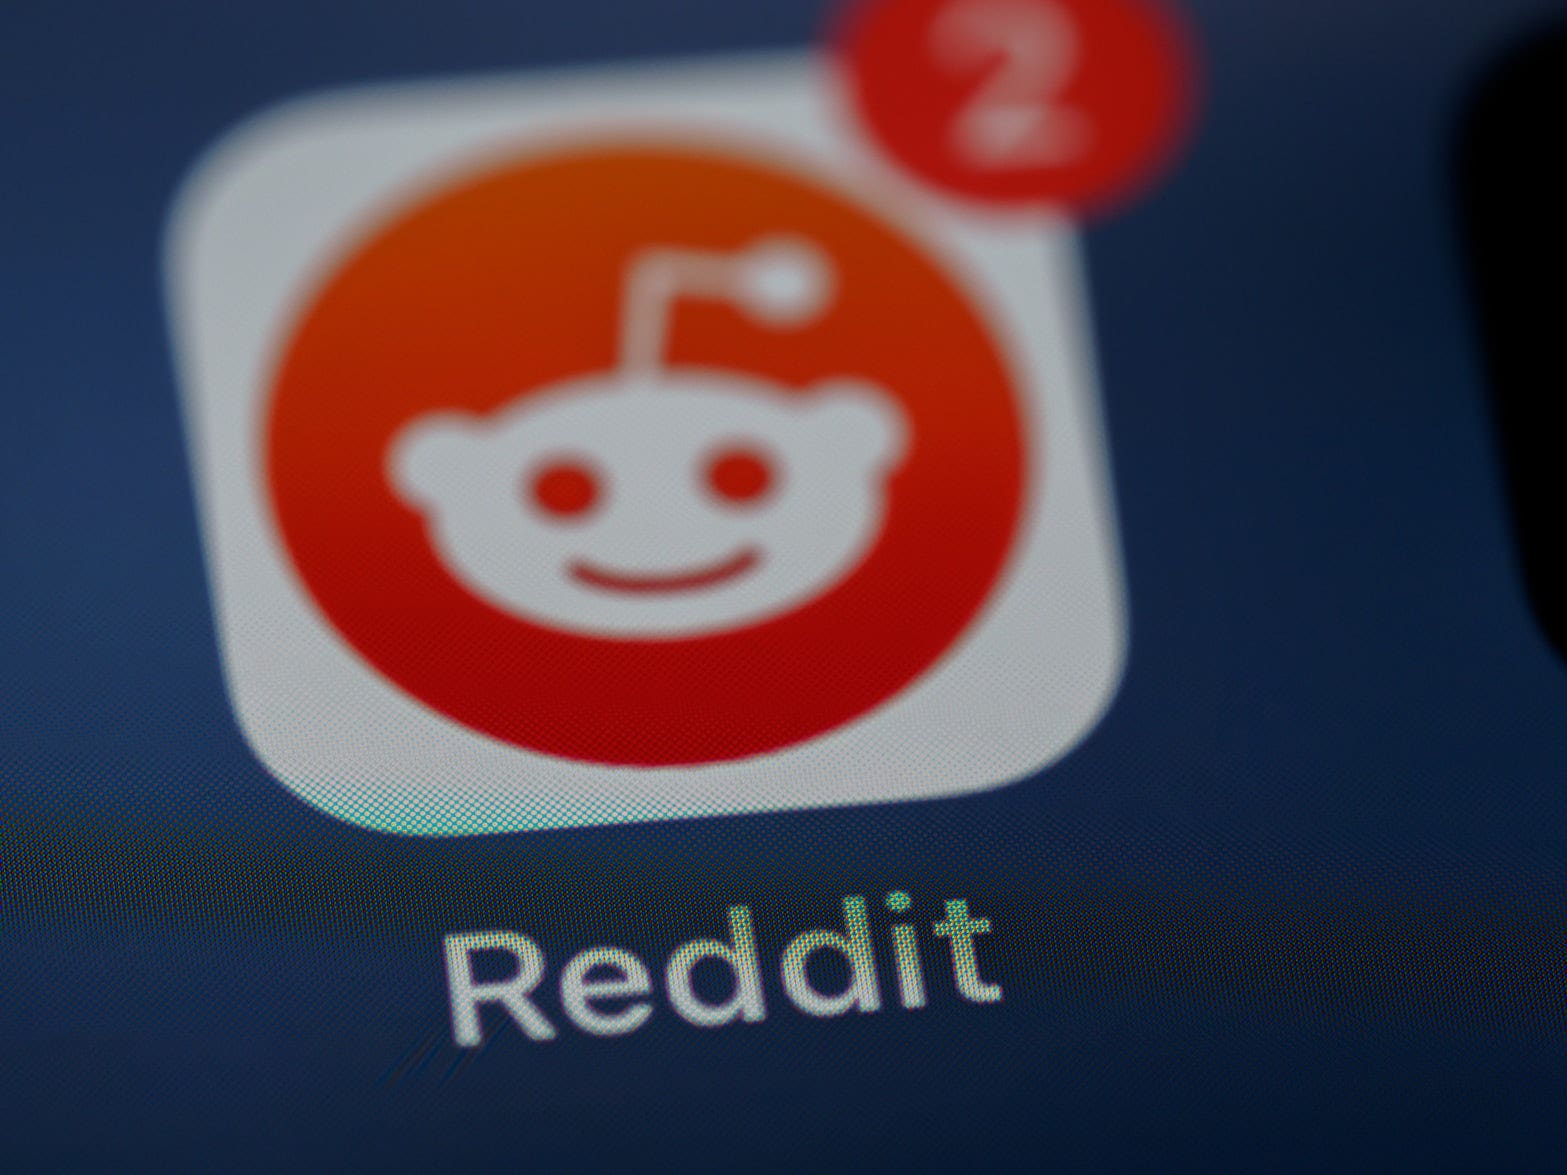 Reddit Users Are Now More Interested In Crypto Than Meme Stocks